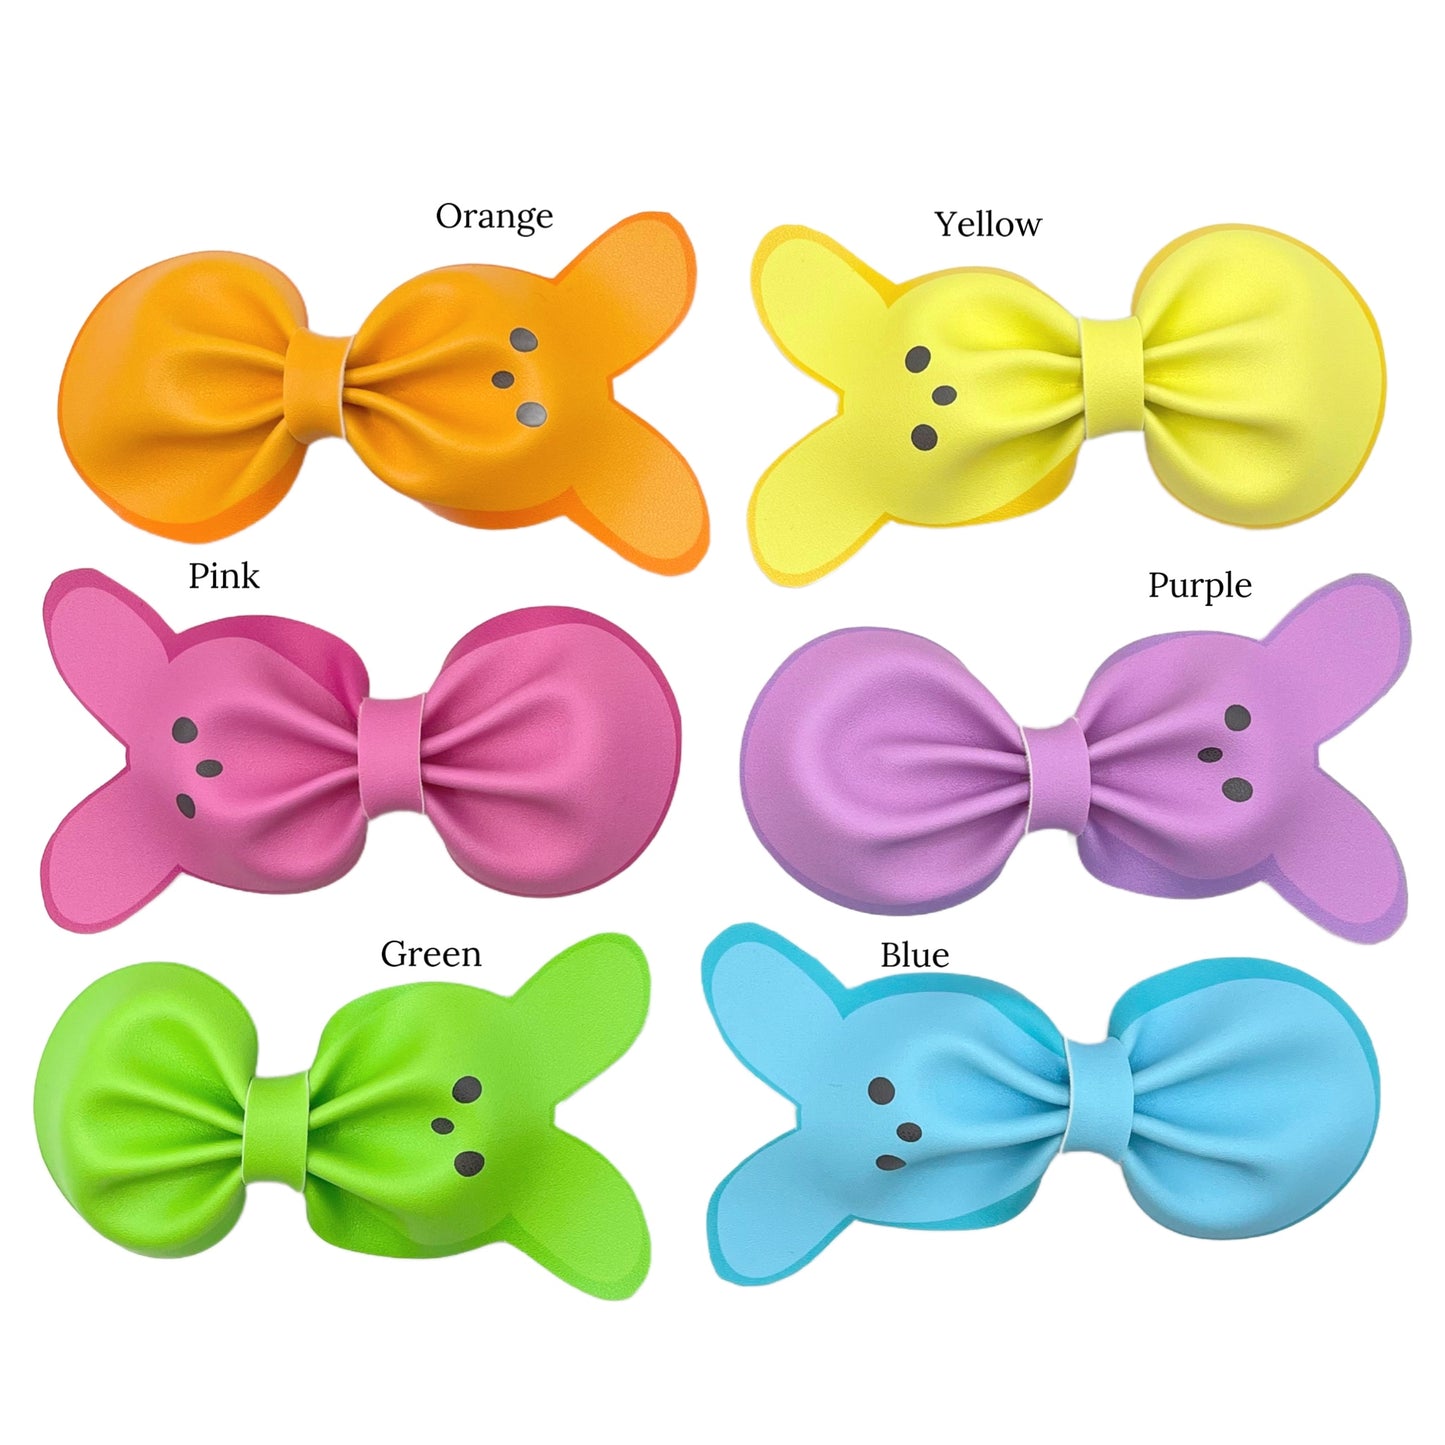 faux leather marshmallow bunnies on faux leather in pink purple orange yellow green and blue